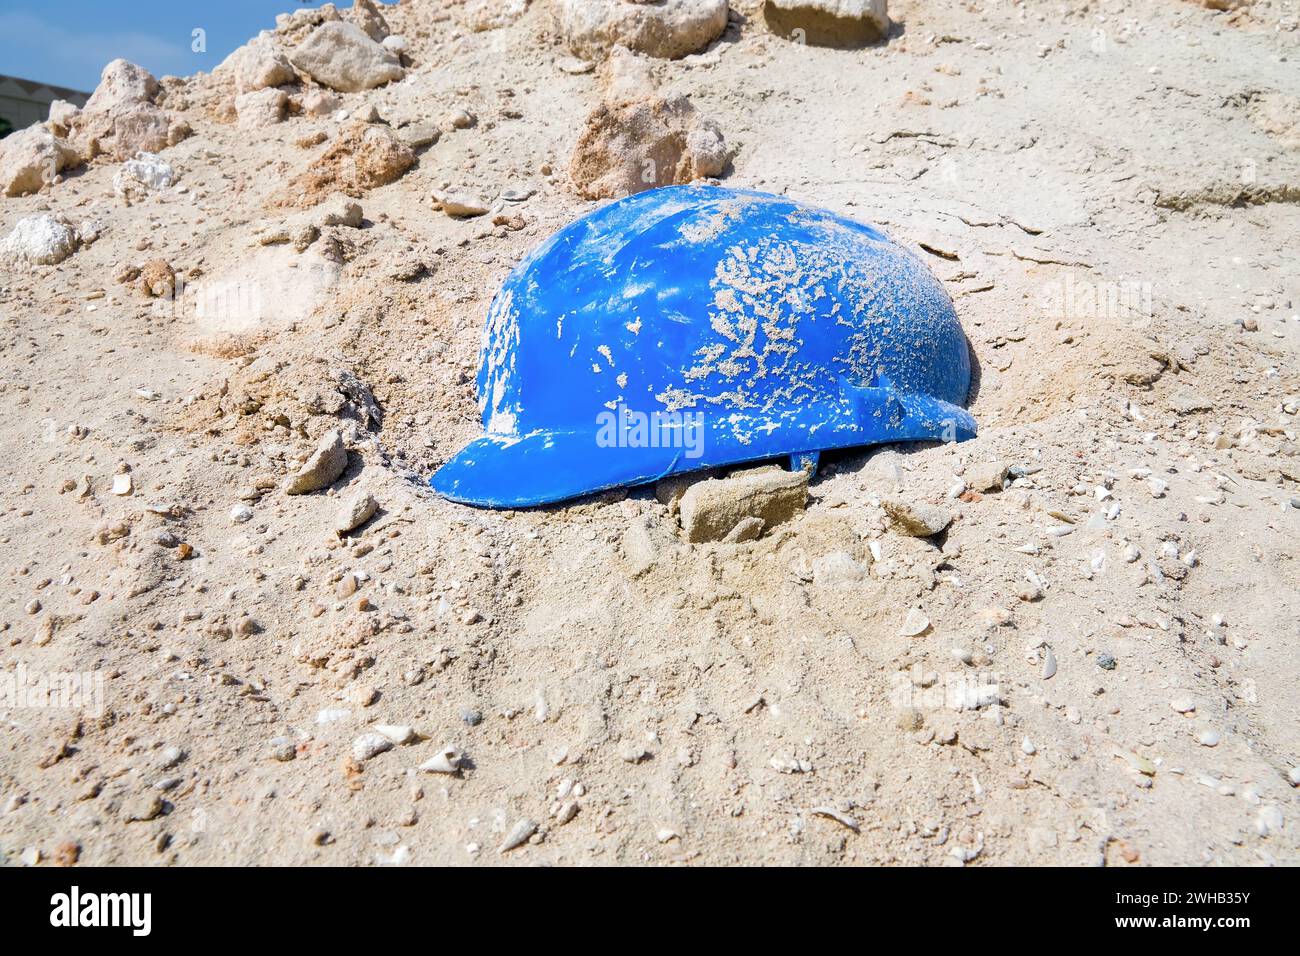 Hastily abandoned construction helmet in the sand. Soil collapse natural disasters and catastrophes Stock Photo